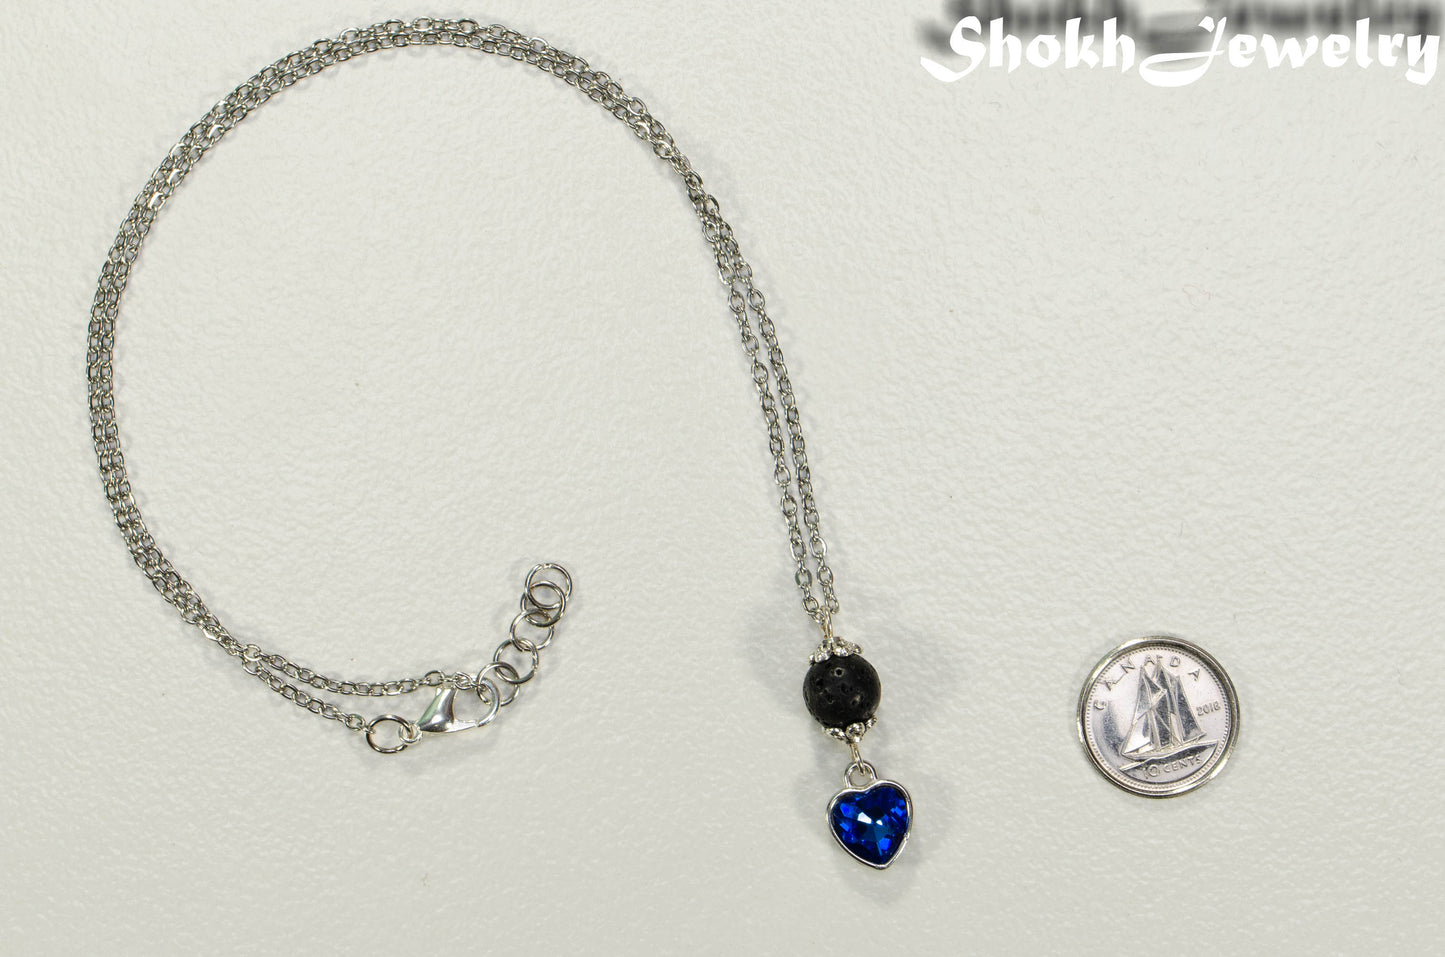 Lava Rock and Heart Shaped December Birthstone Choker Necklace beside a dime.